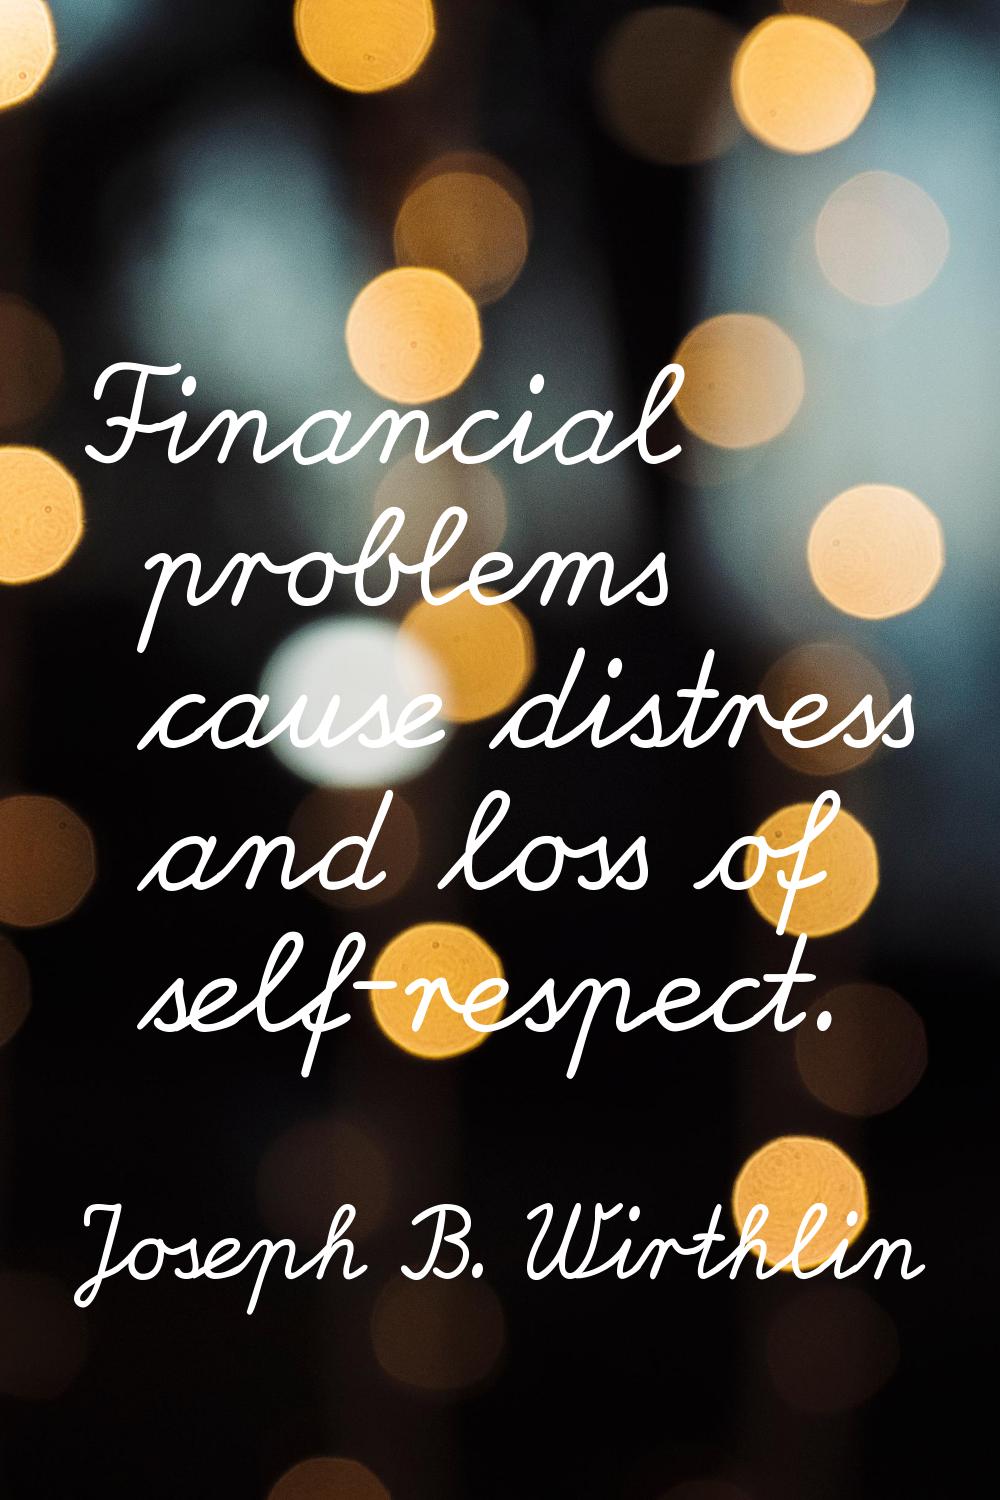 Financial problems cause distress and loss of self-respect.